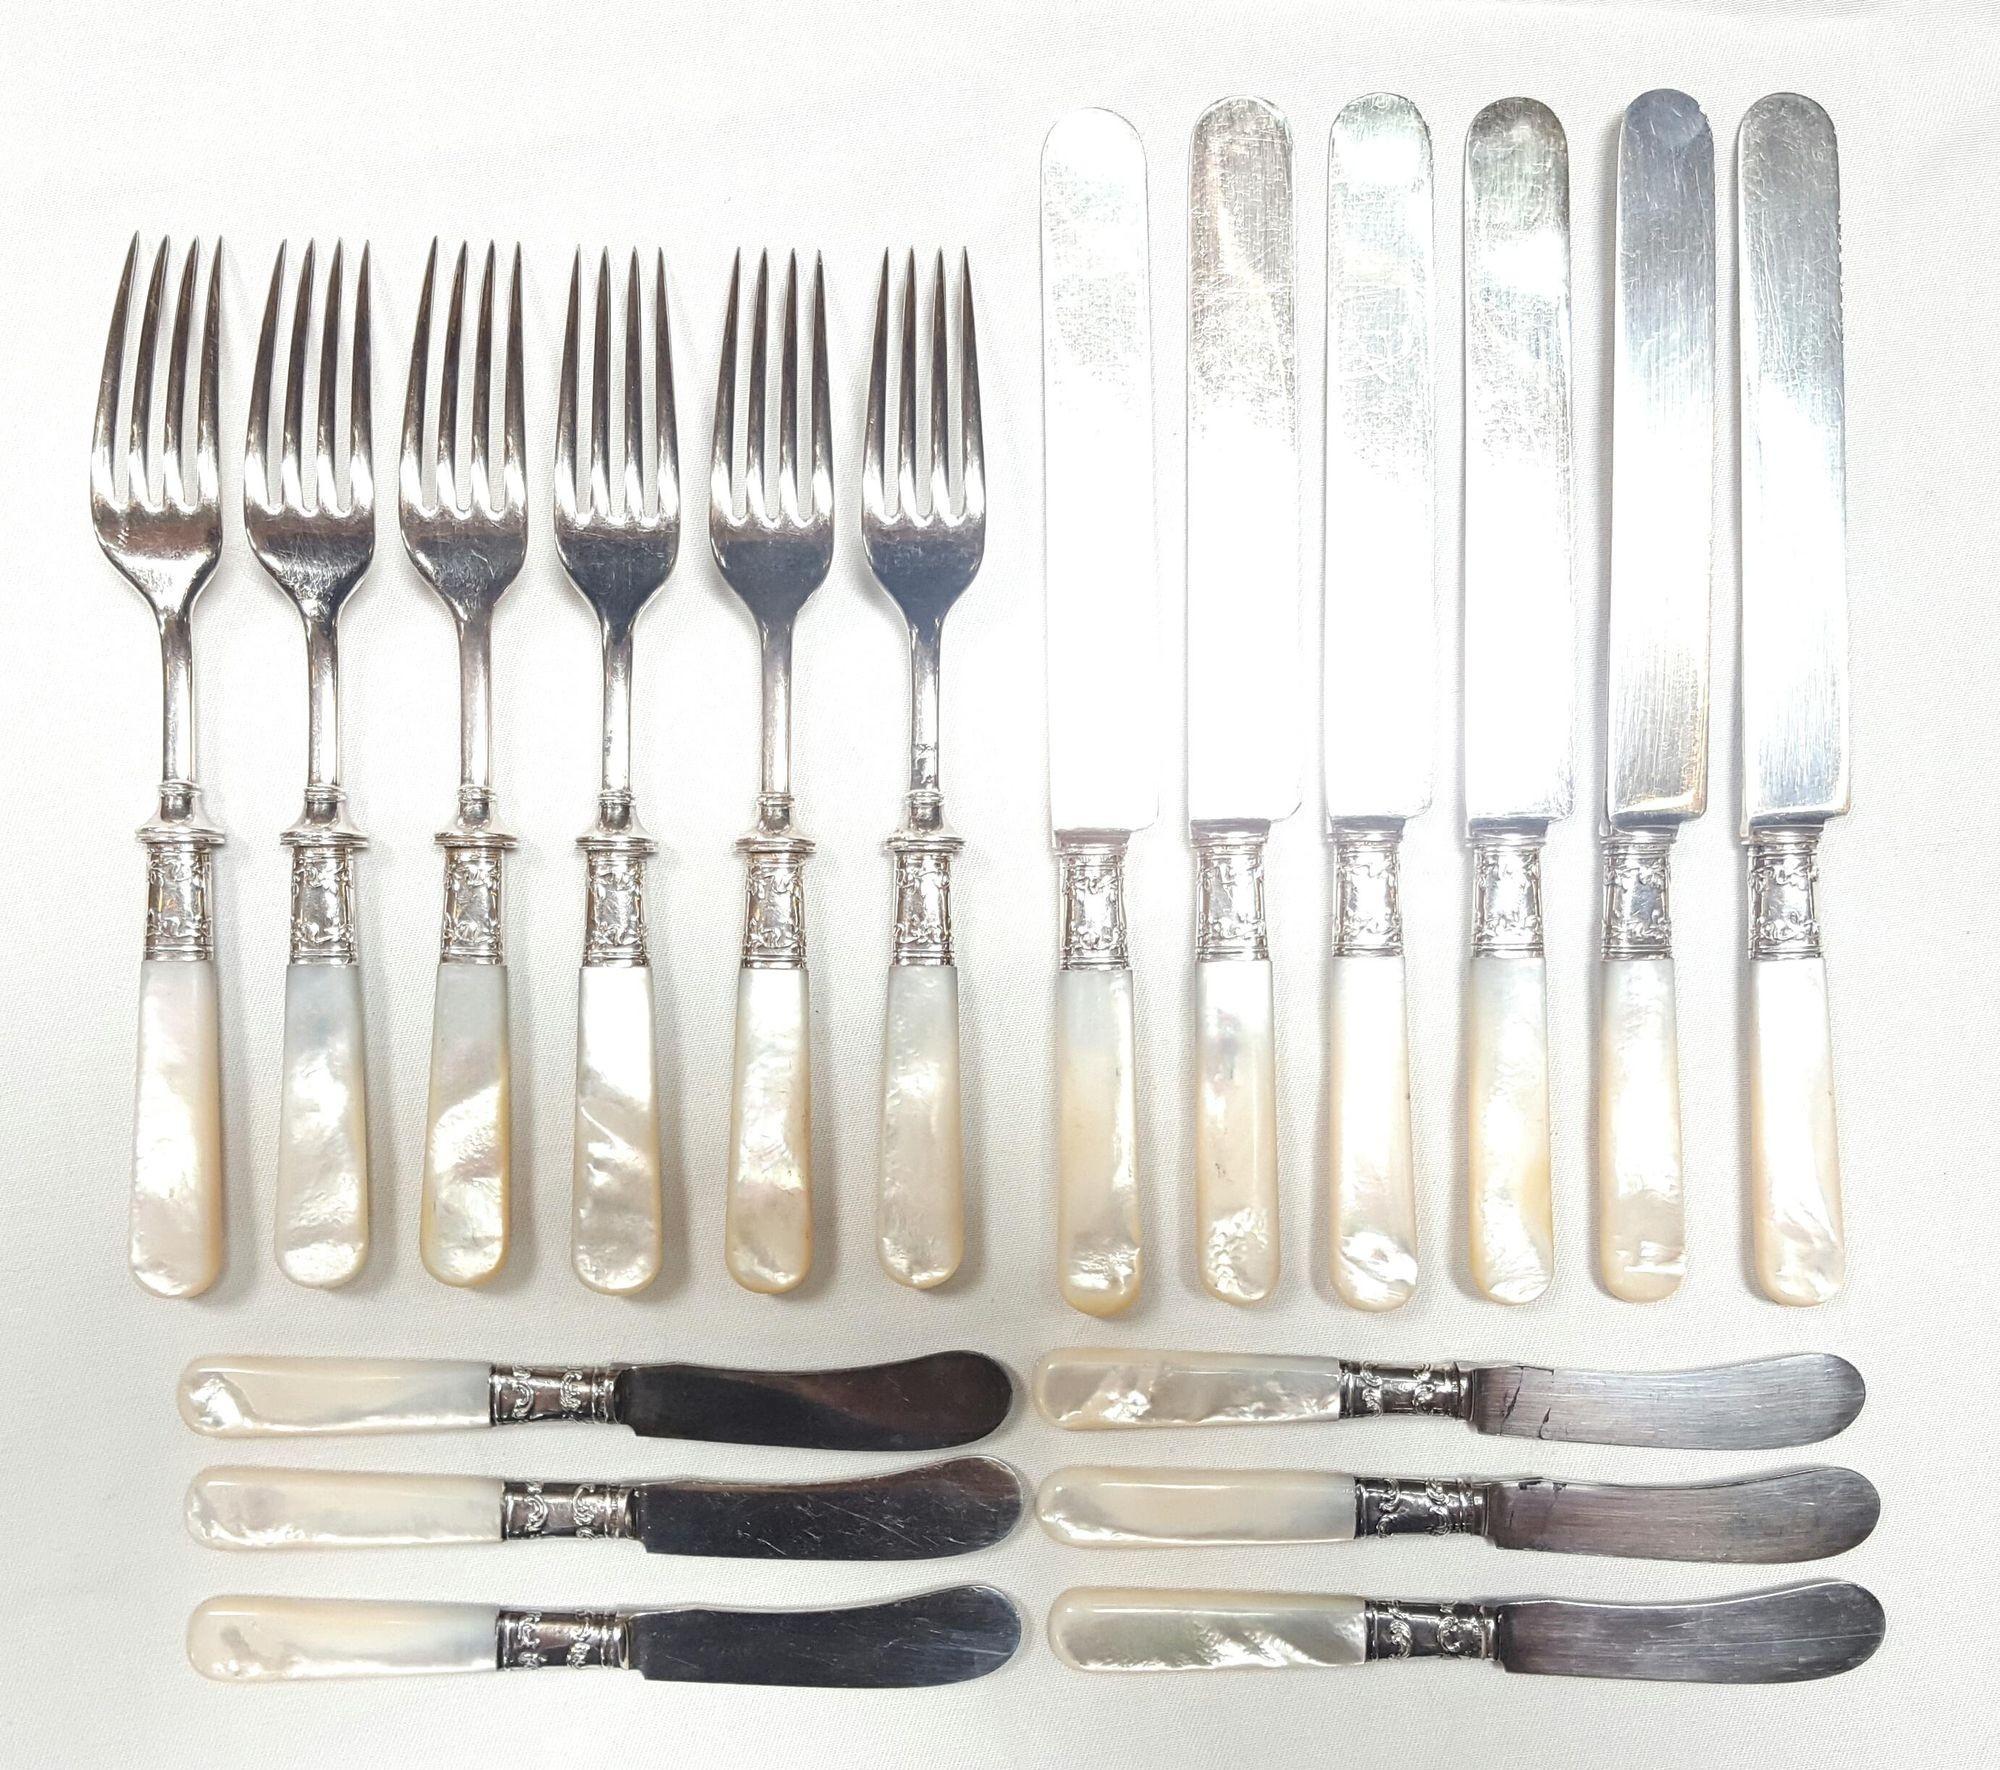 Landers, Frary & Clark Fish Set - Aetna Works
Qty: Set Of 18 Pieces (As Pictured) 6-Dinner Forks, 6 -Dinner Knives And 6-Butter Knives
Material: Mother Of Pearl Handles And Sterling Silver
Info: Beautiful 6 Serving Fish Set Made By Landers, Frary